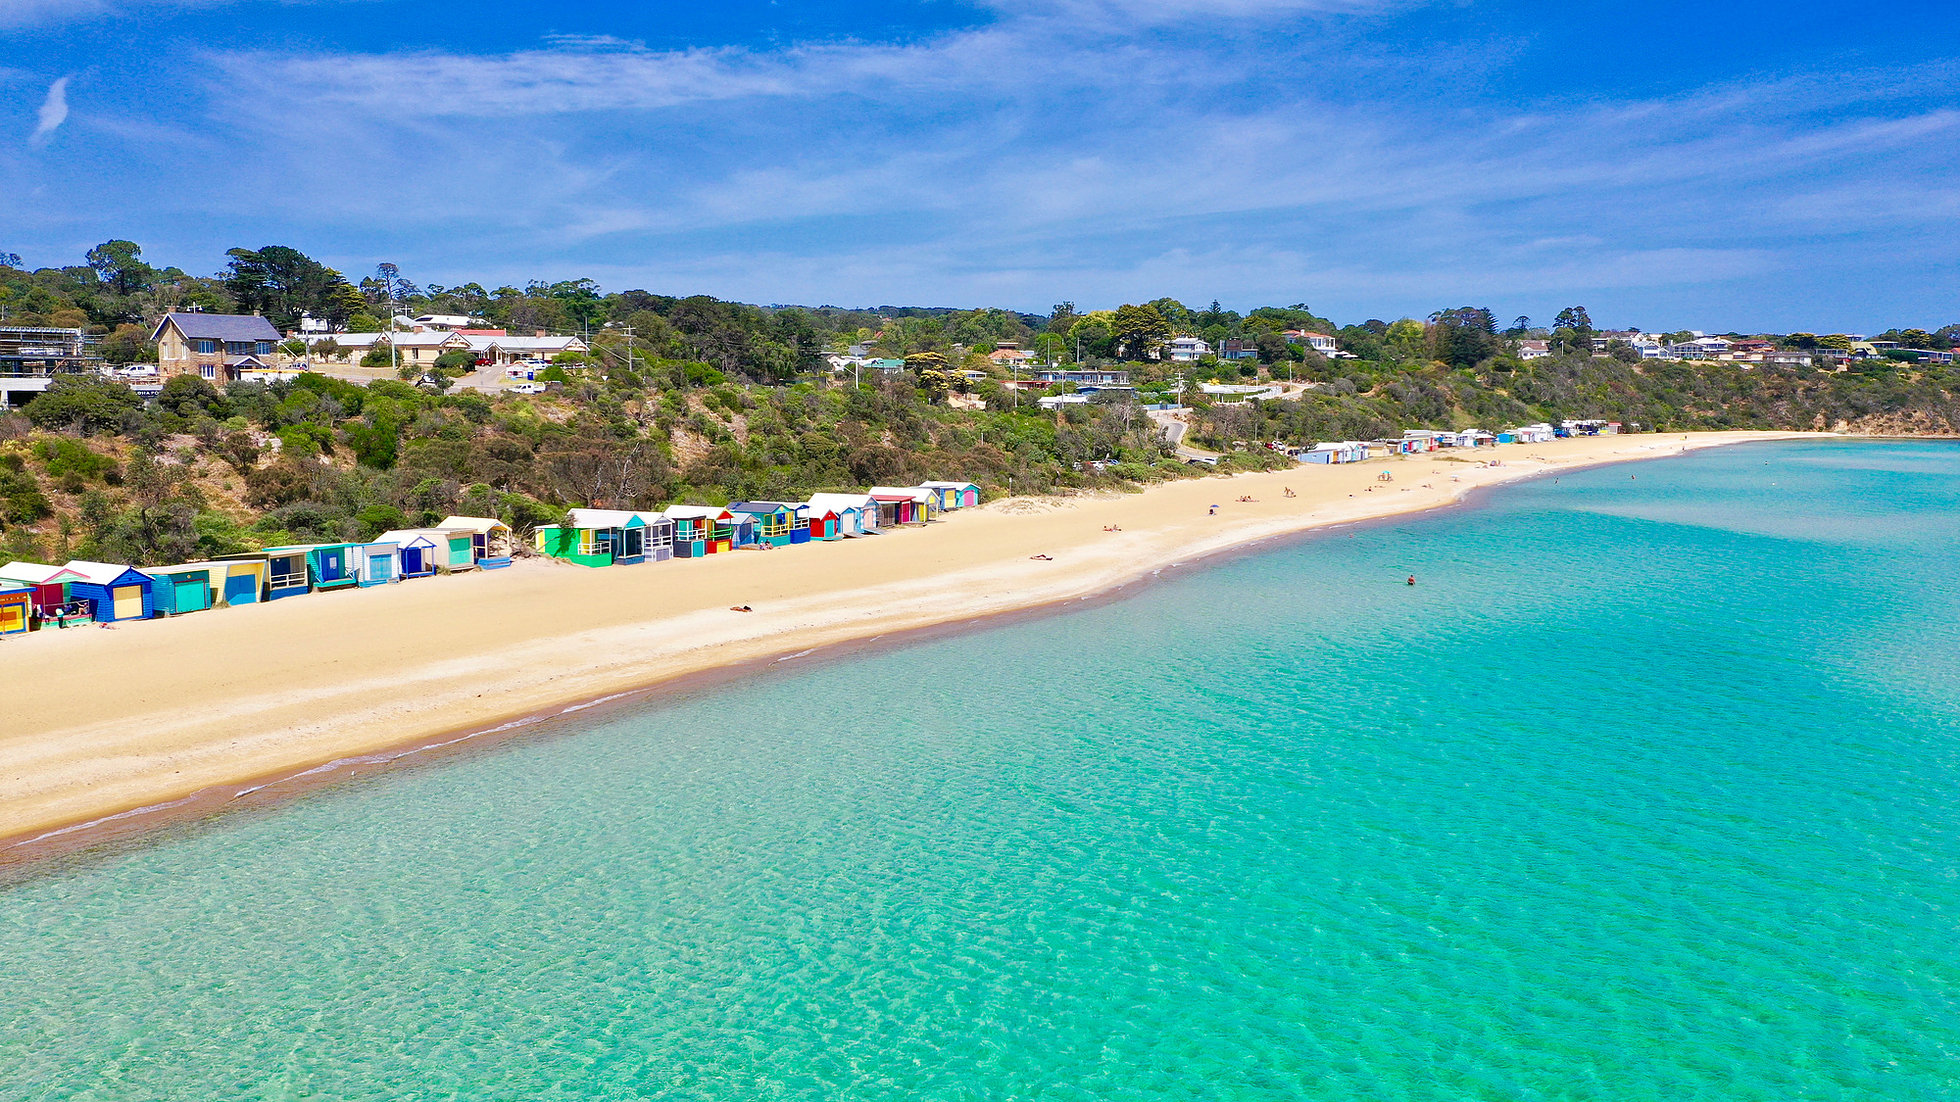 Why the Mornington Peninsula should be your next holiday destination